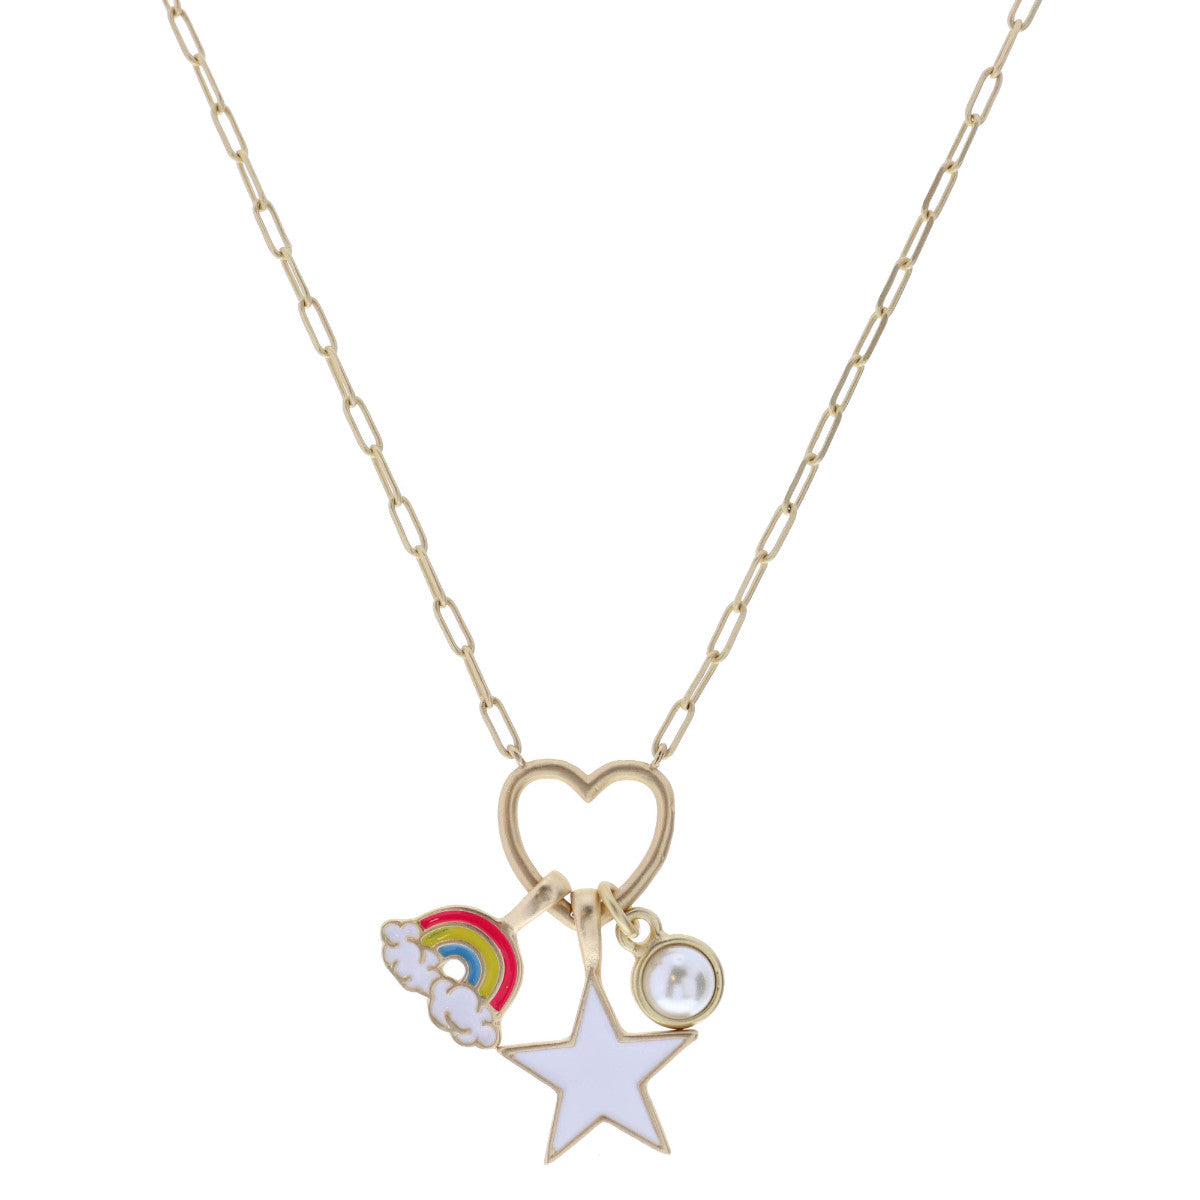 Rainbow, White Star and Pearl on Heart Necklace